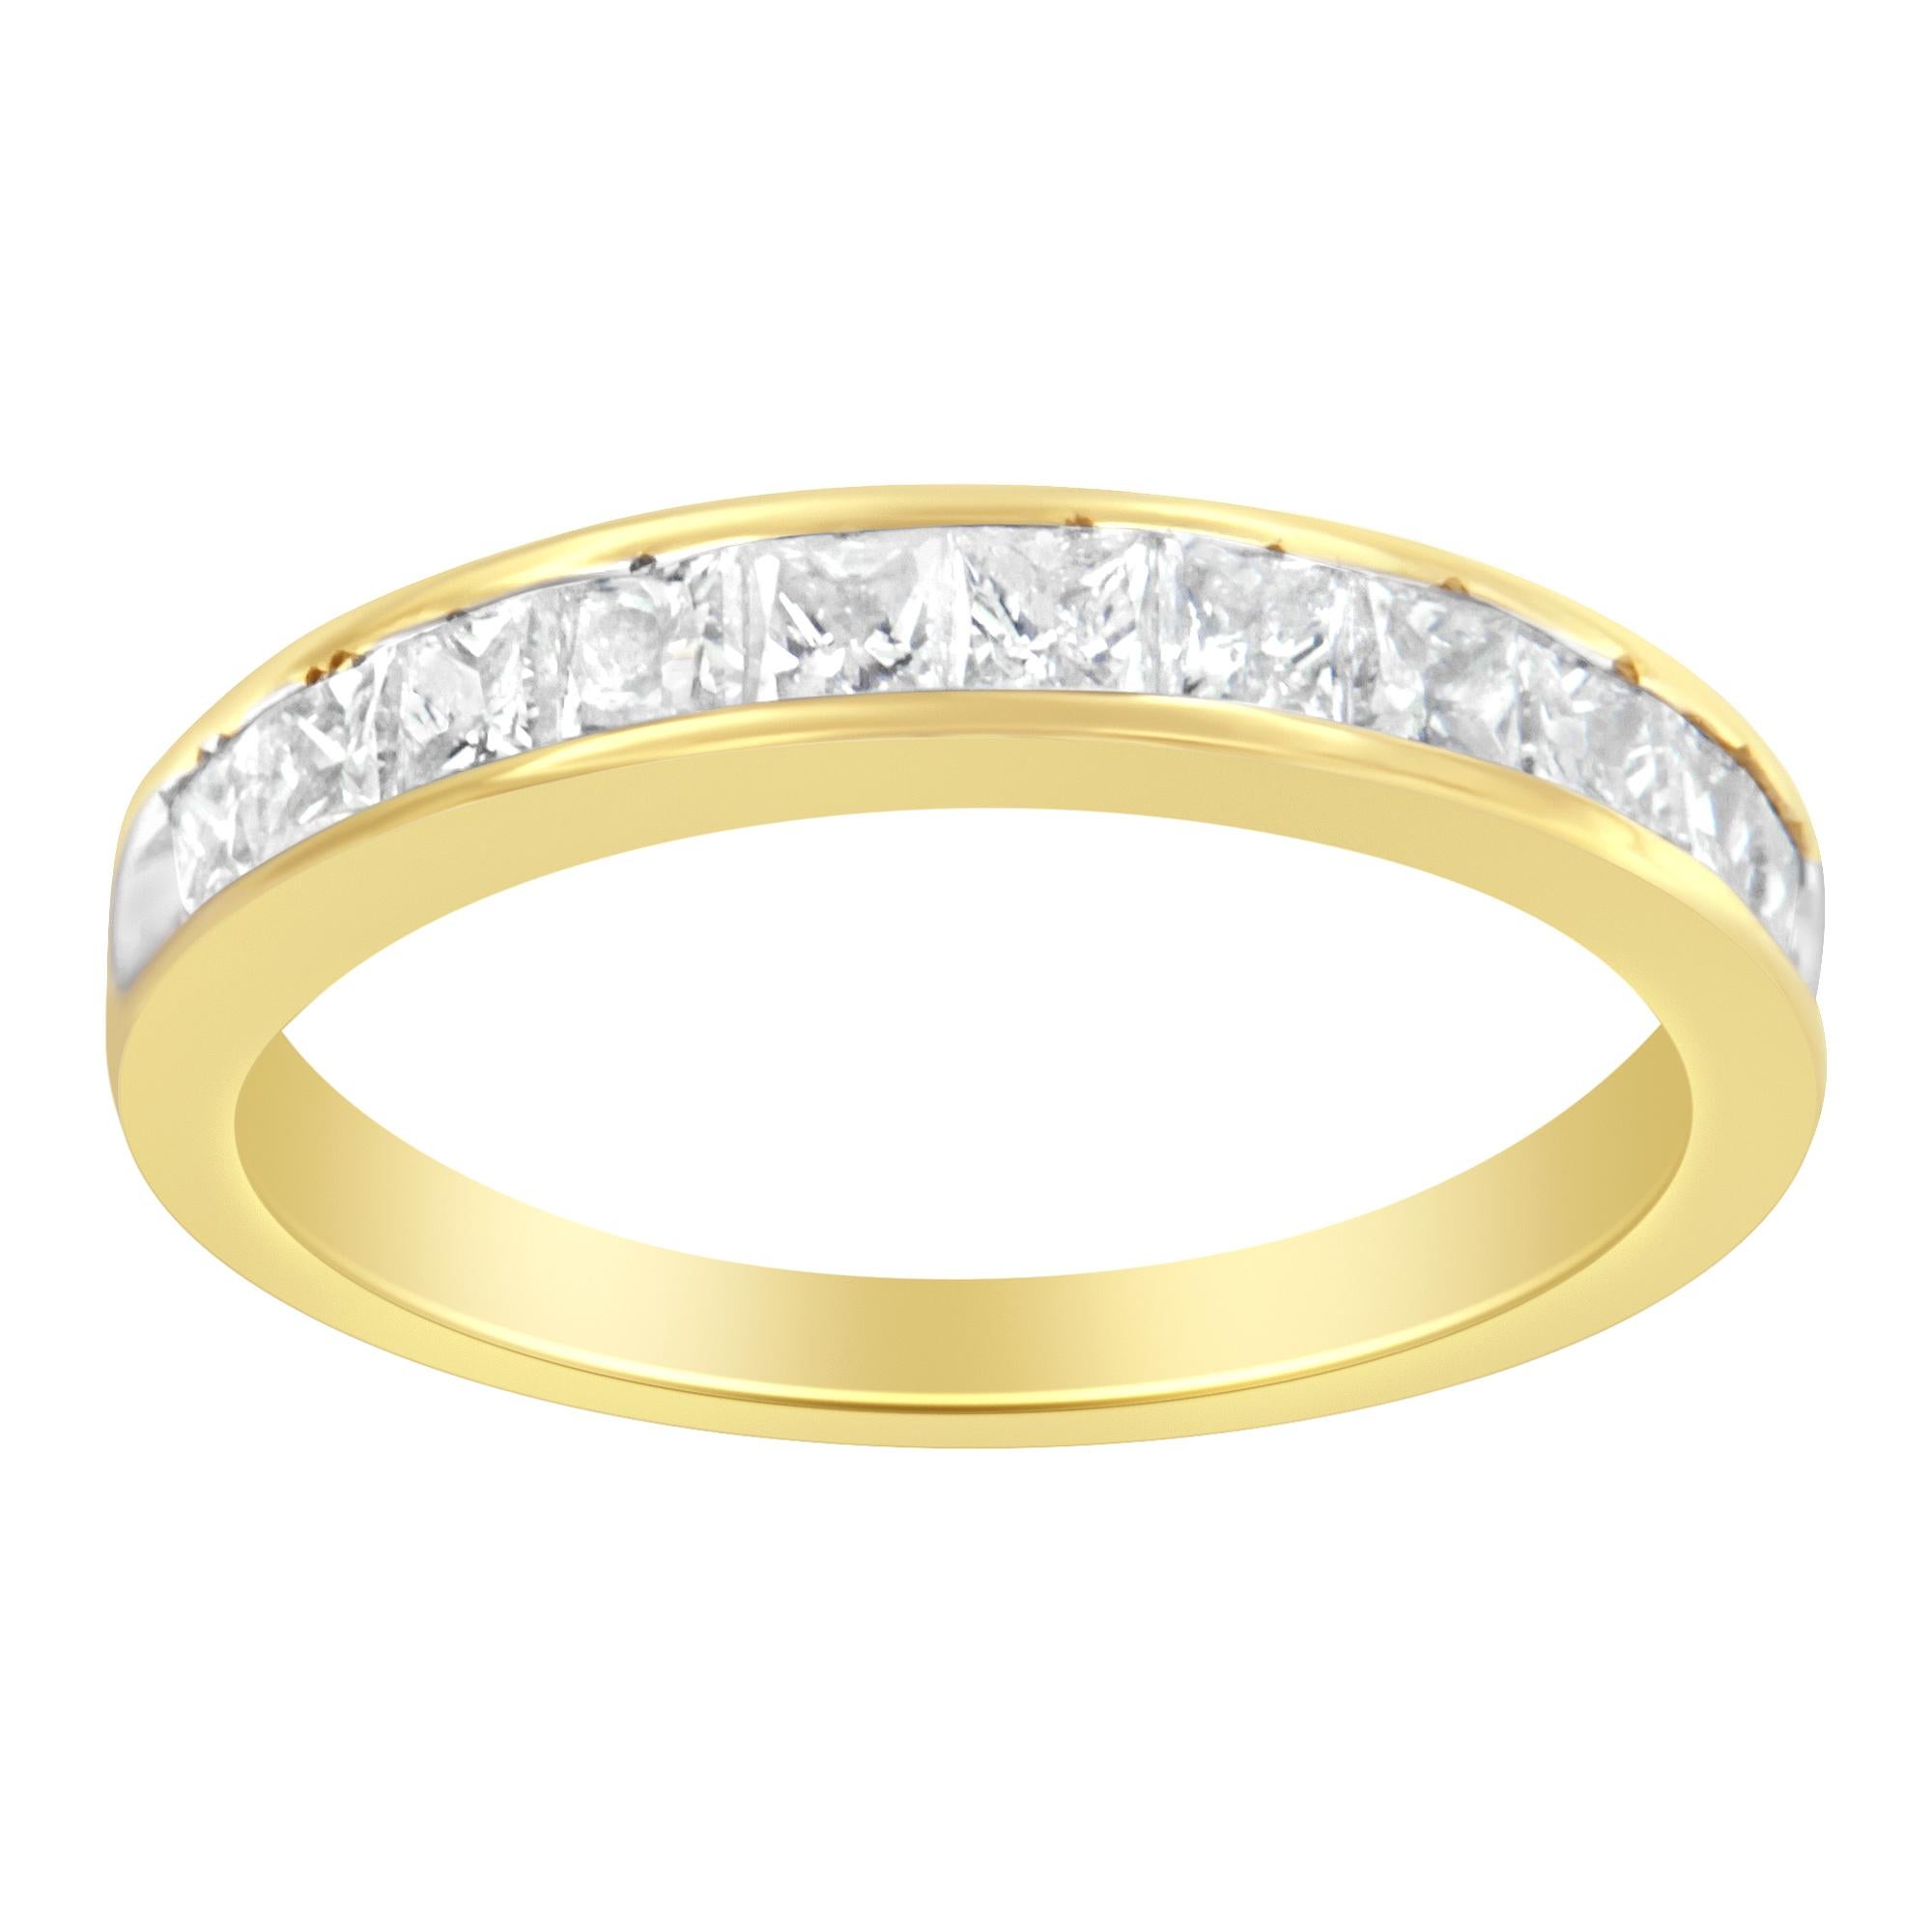 This part eternity band features princess cut diamonds channel set in a yellow gold band. This classic design is a perfect choice for your loved one. It has a total diamond weight of 1 carat. 

'Video Available Upon Request'

Product